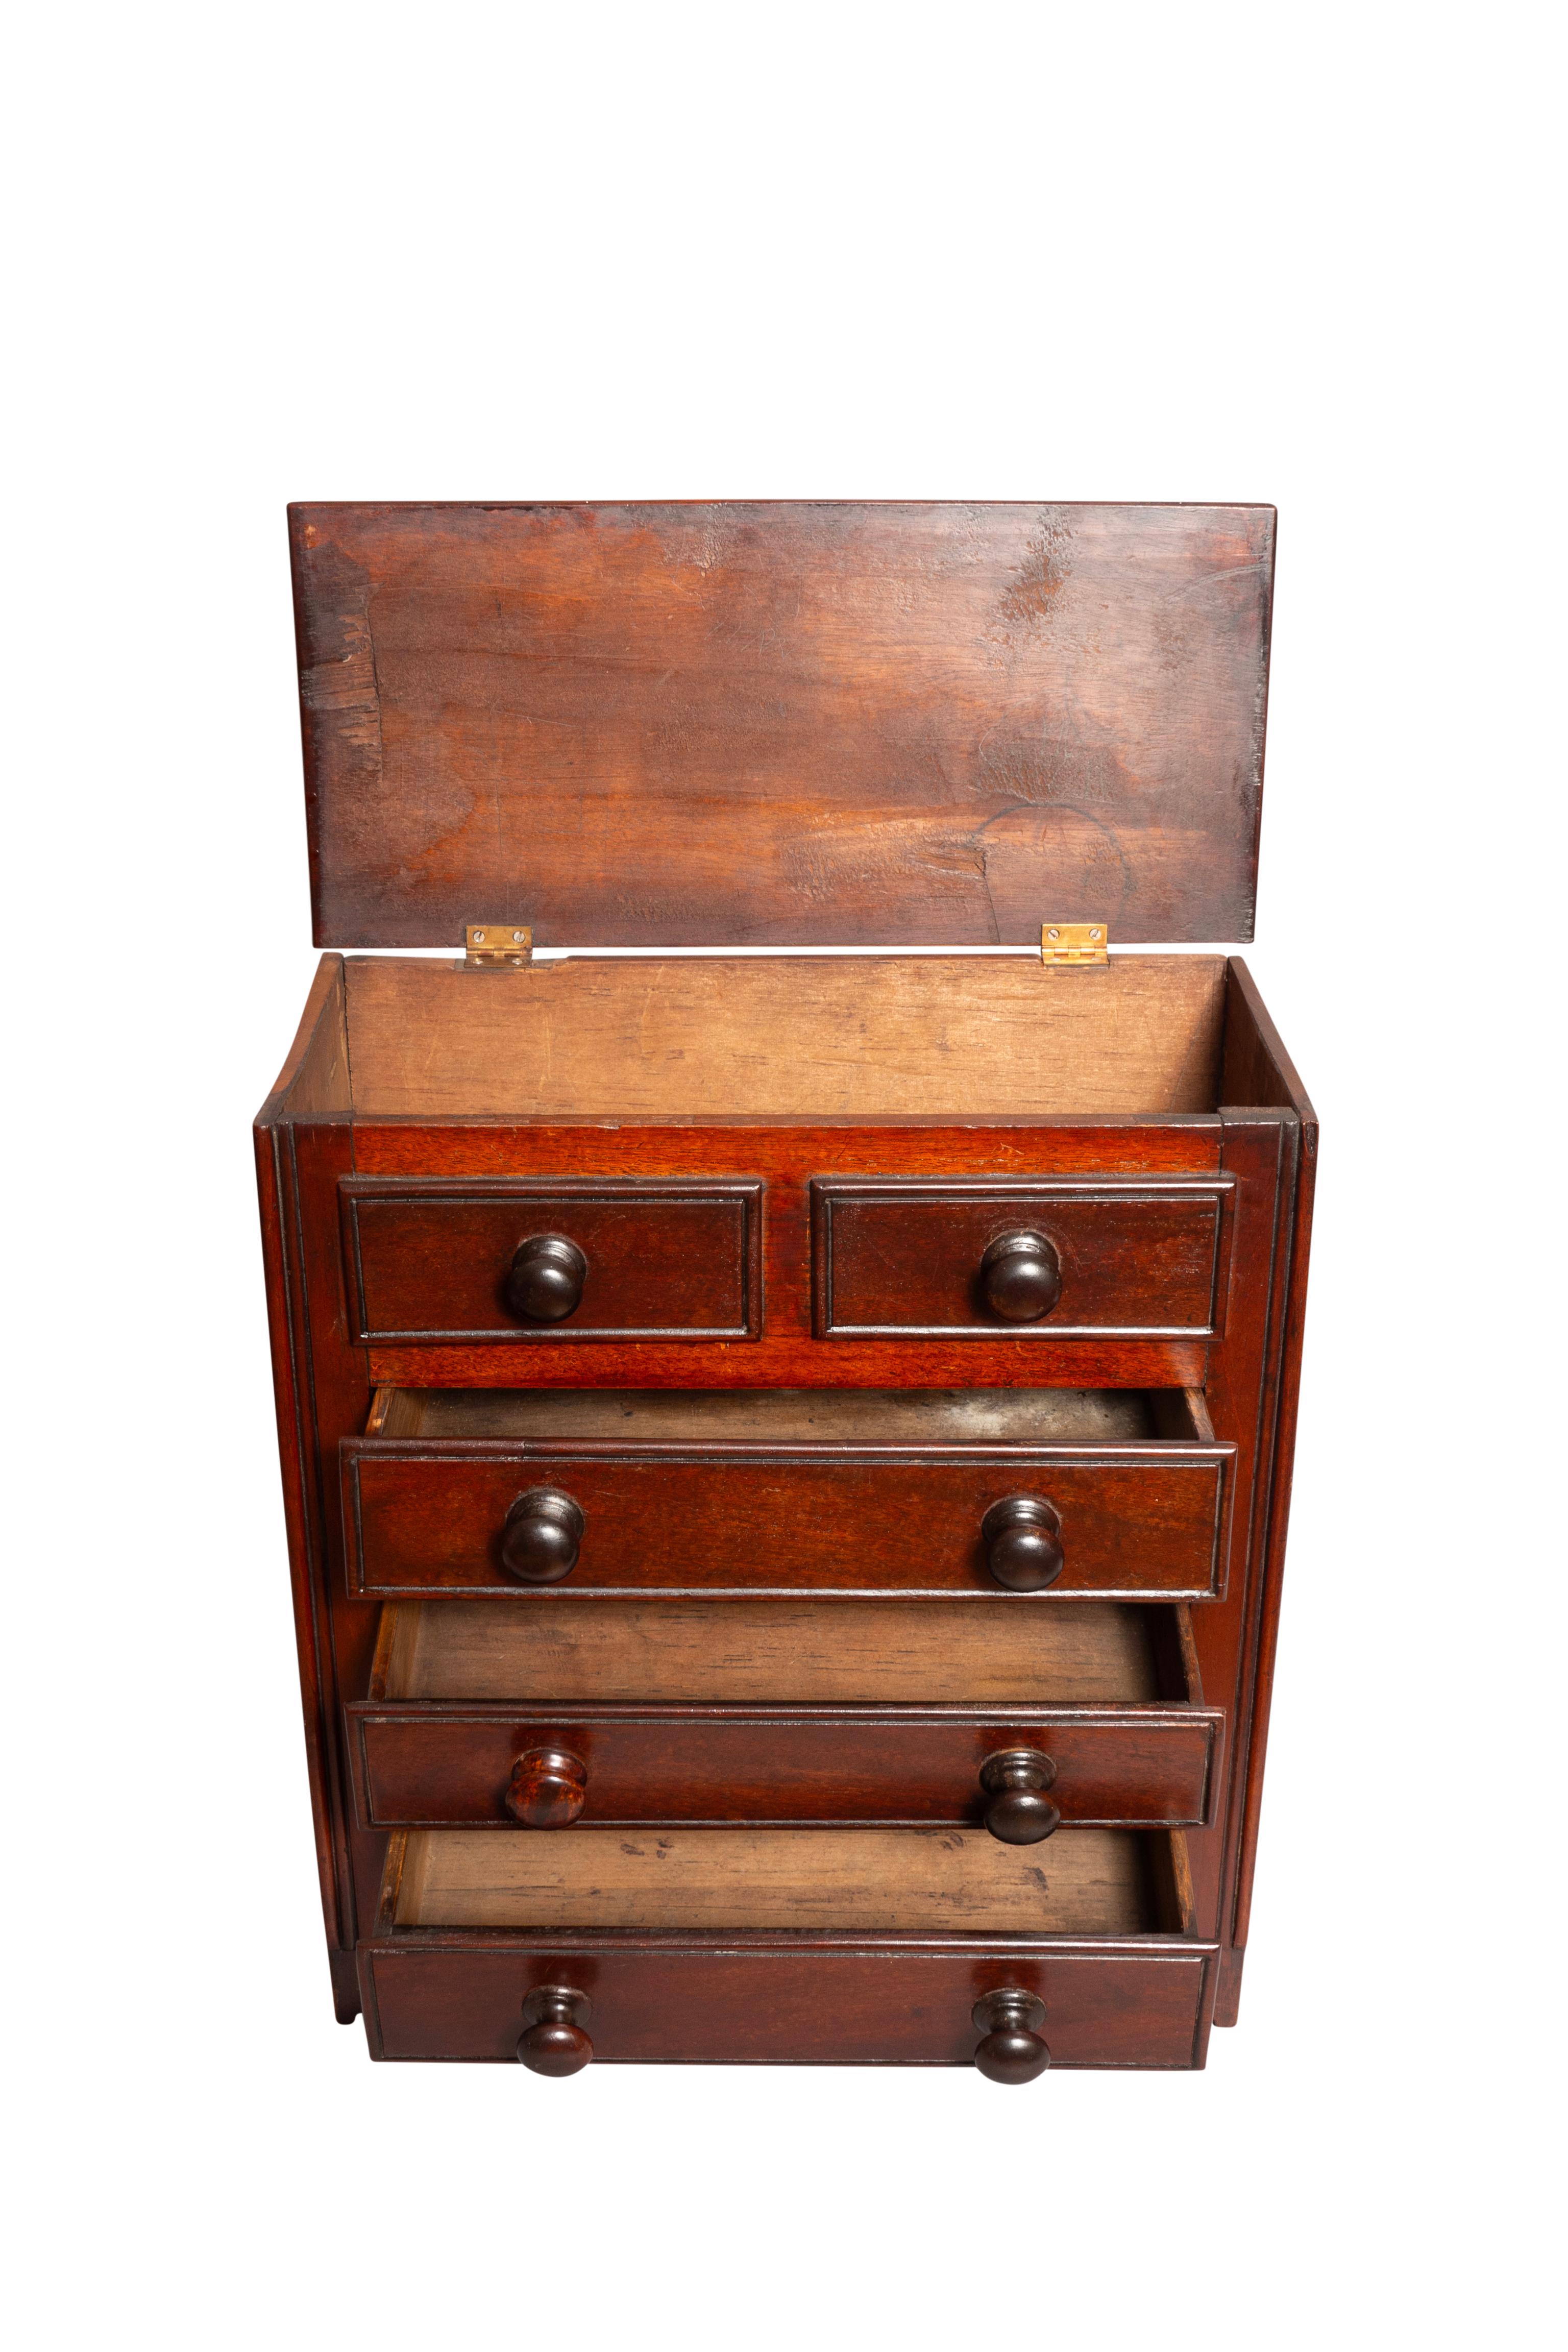 Salesman size chest with lifting top concealing a compartment. Three working drawers below. Bracket feet.